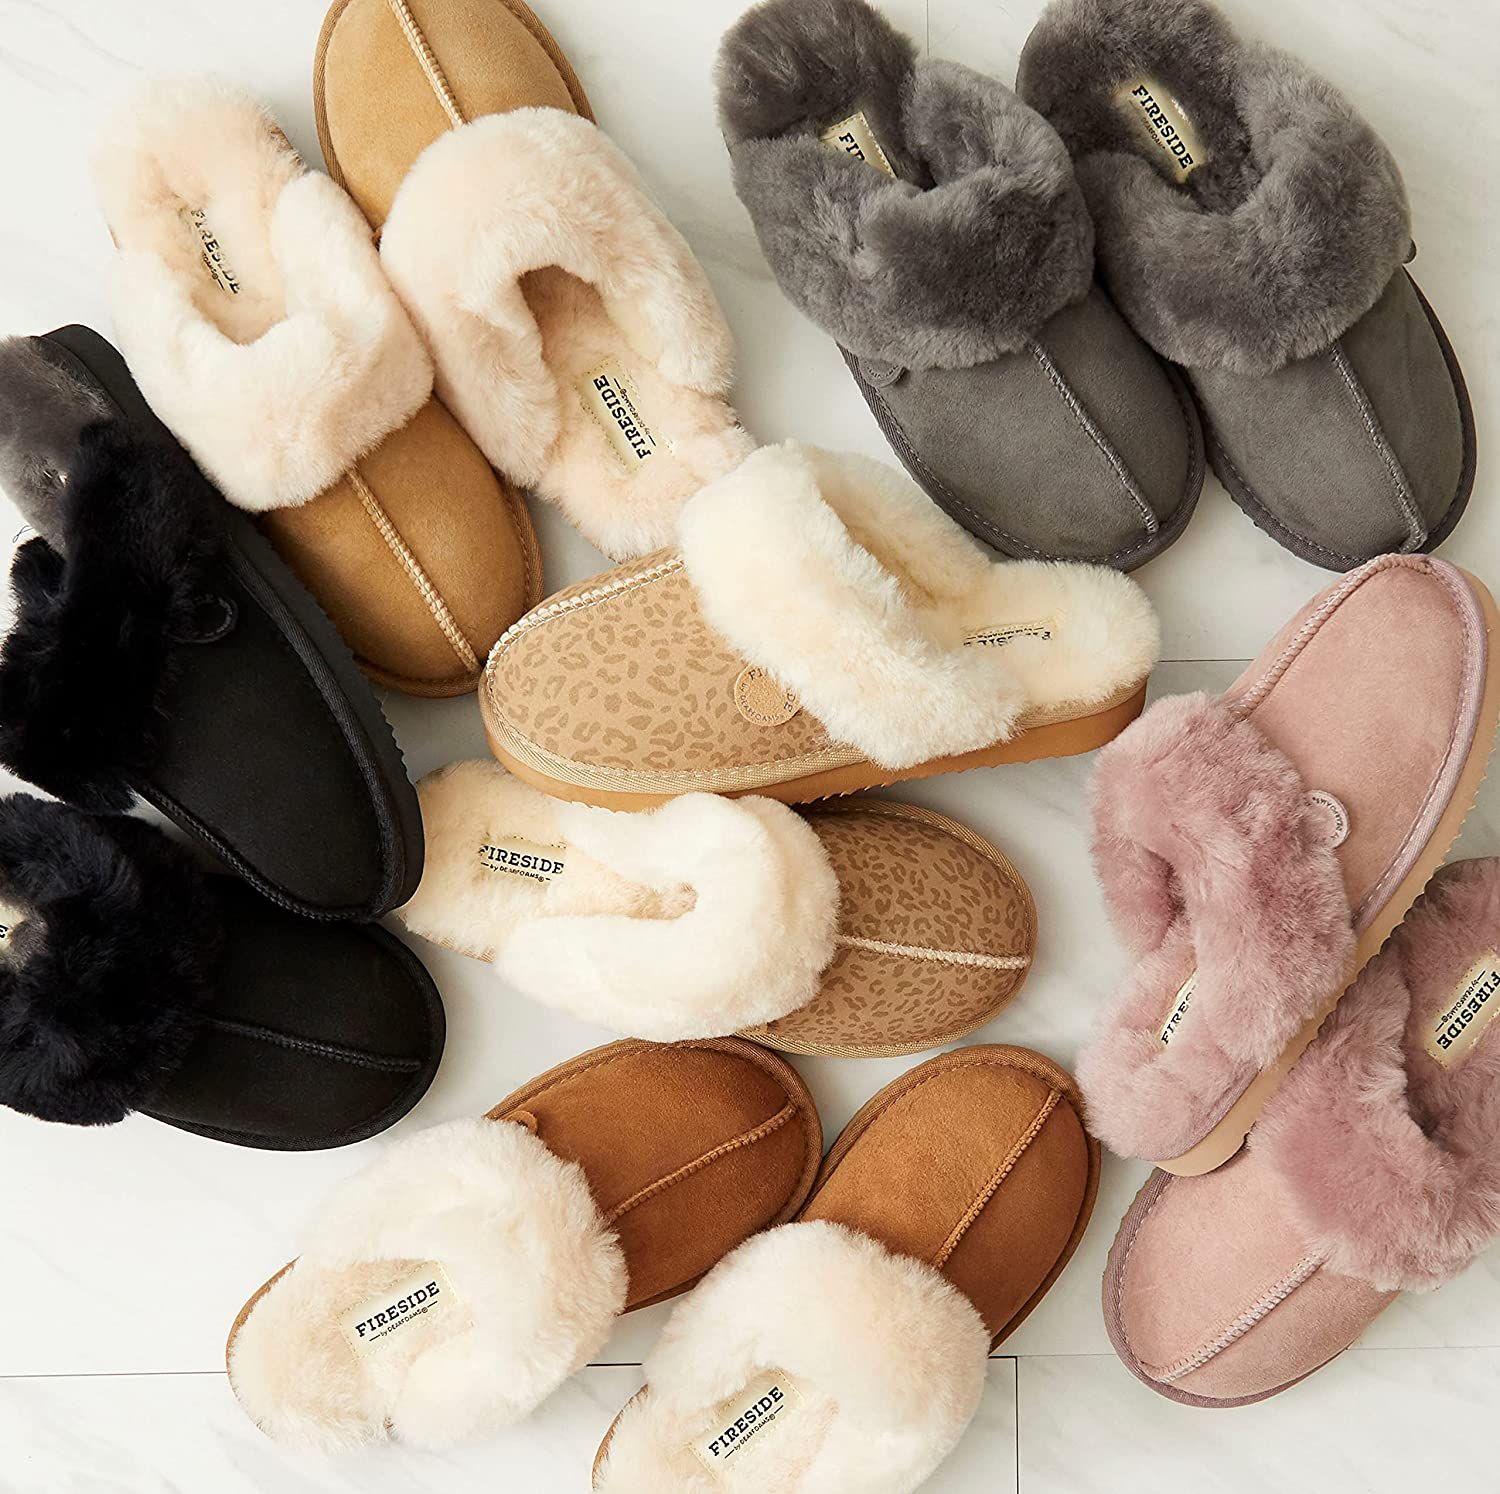 the best slippers for women